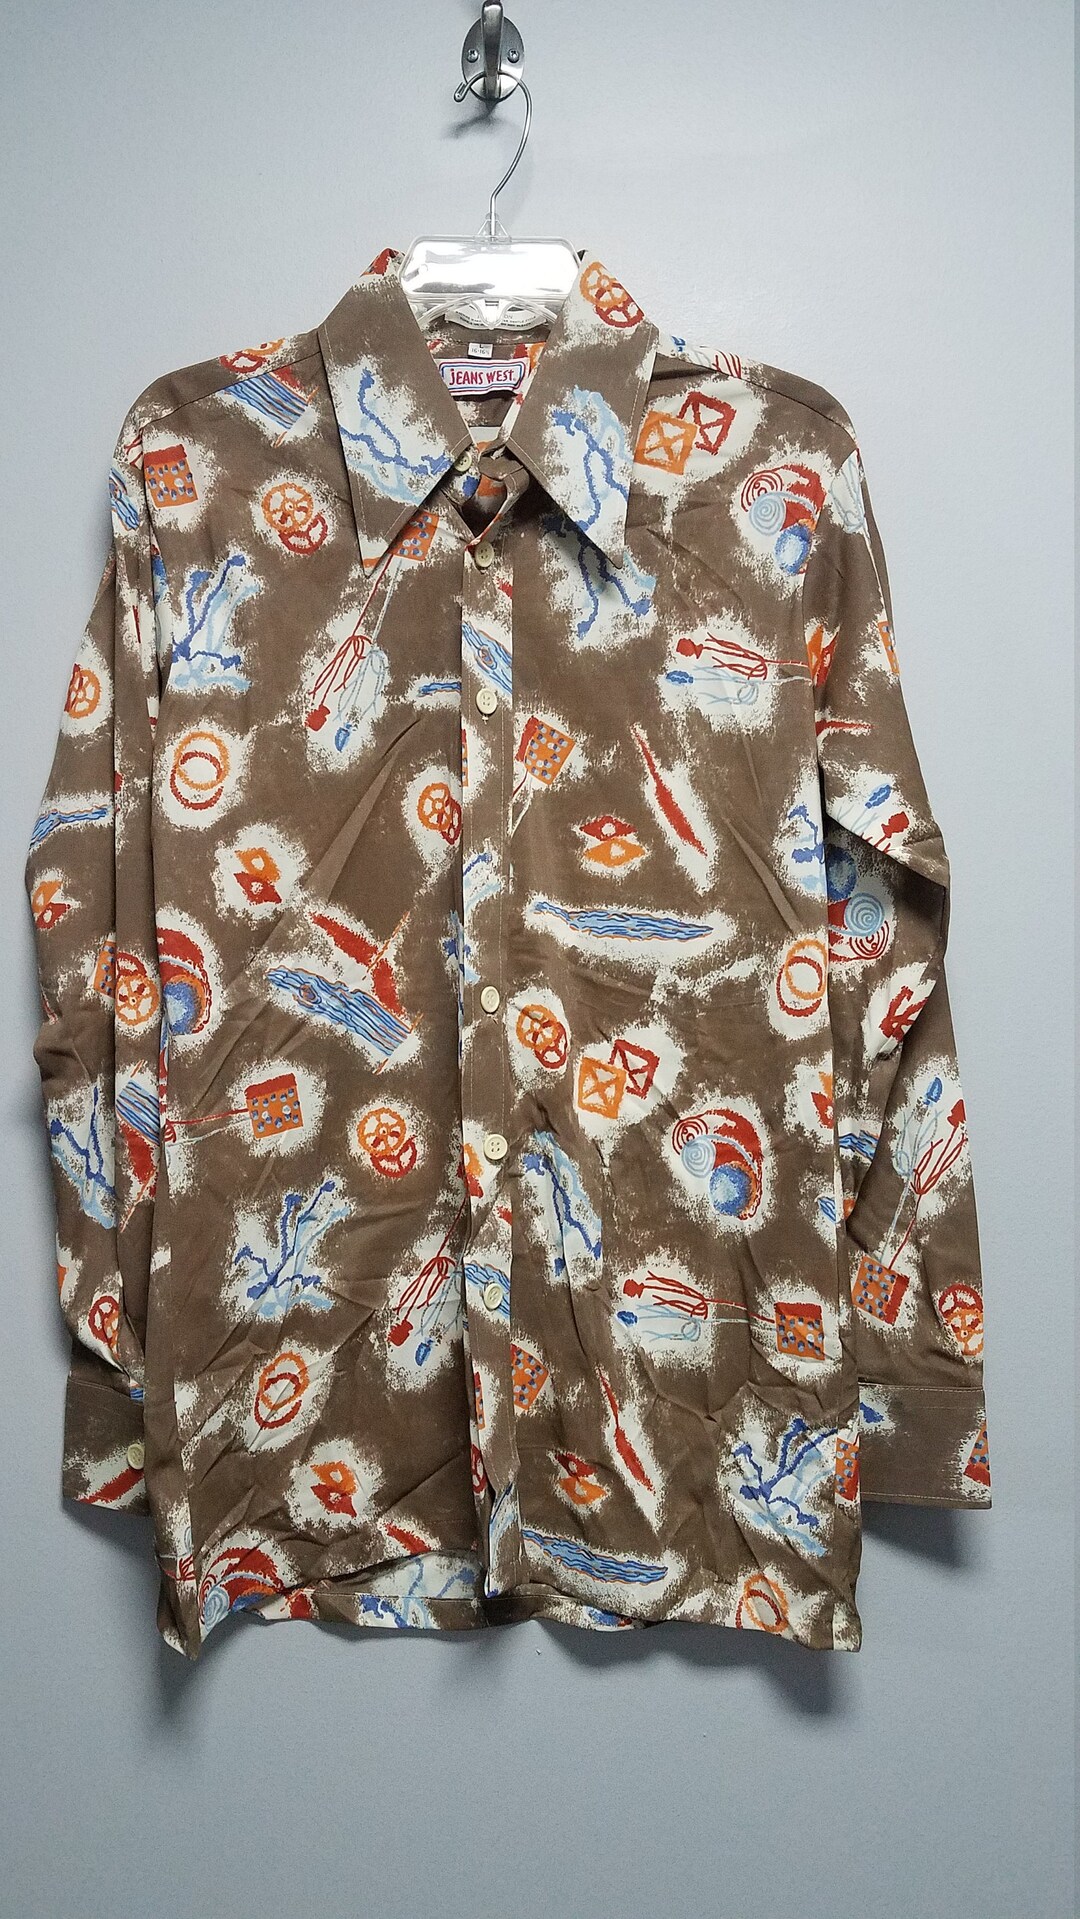 Vintage Men's Shirt 60's by JEANS WEST Never Worn - Etsy